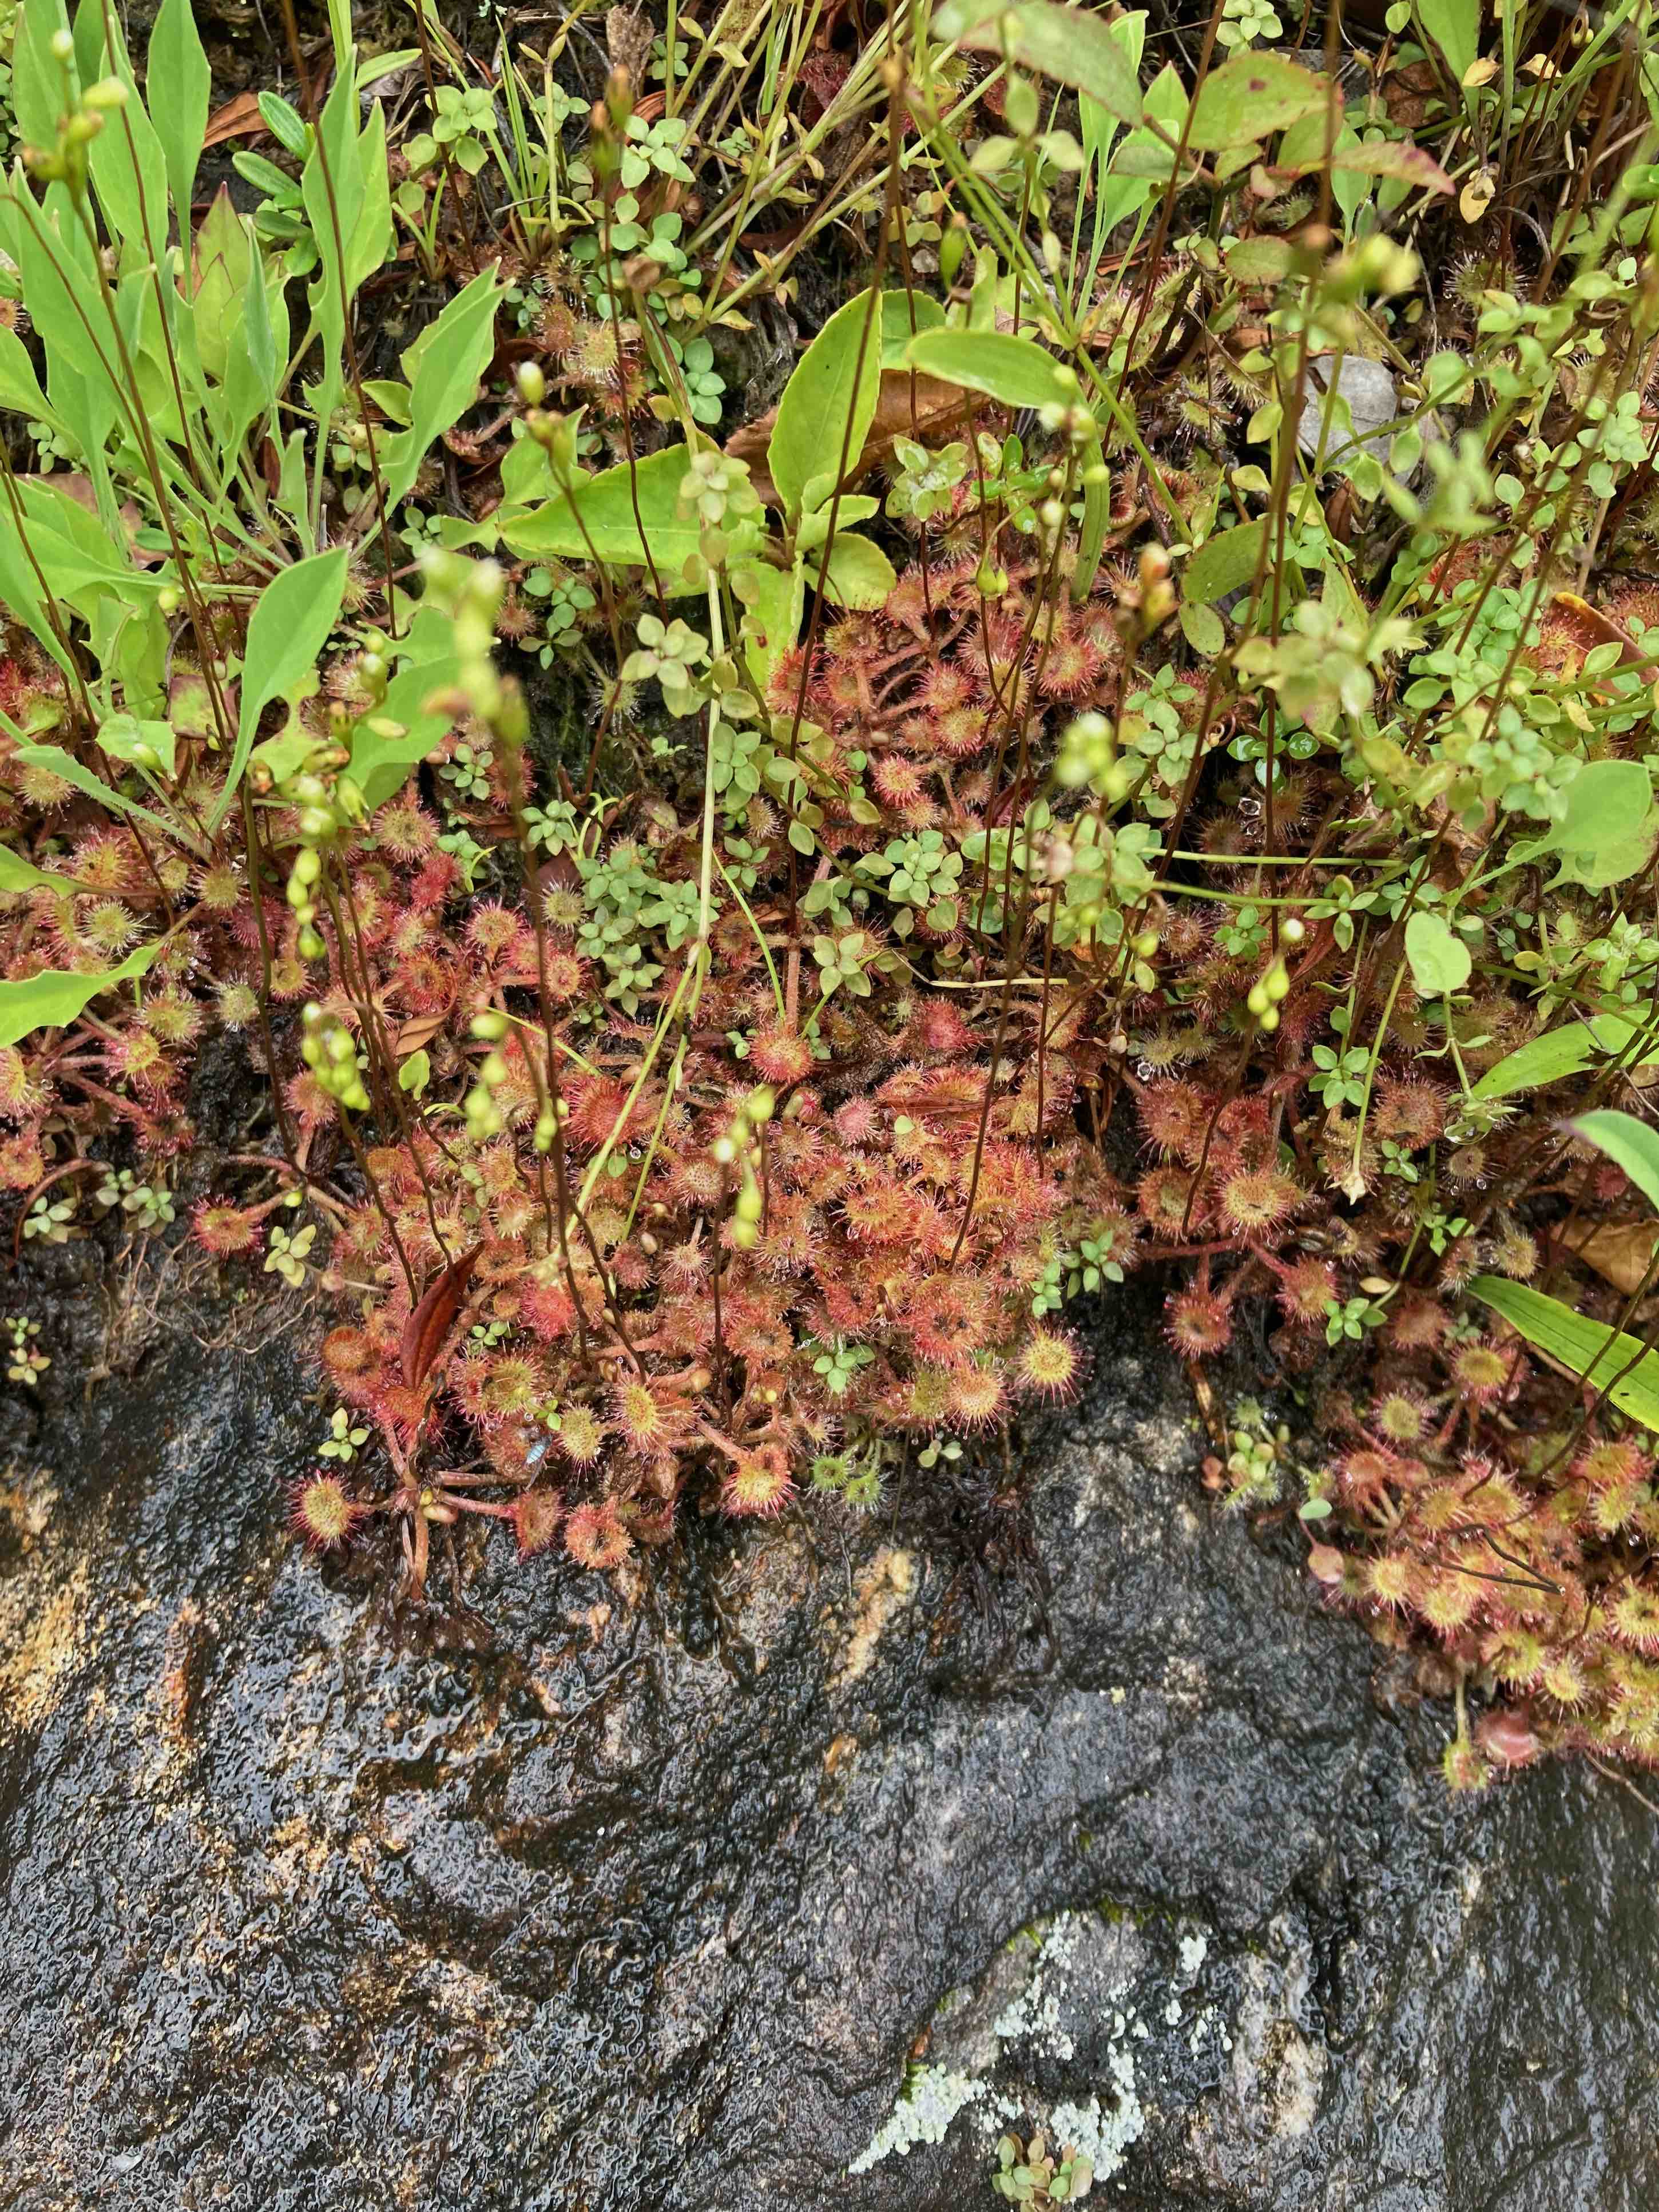 The Scientific Name is Drosera rotundifolia. You will likely hear them called Roundleaf Sundew. This picture shows the A very dense population on a steep rocky cliff along the Blue Ridge Parkway (vertical bog). of Drosera rotundifolia